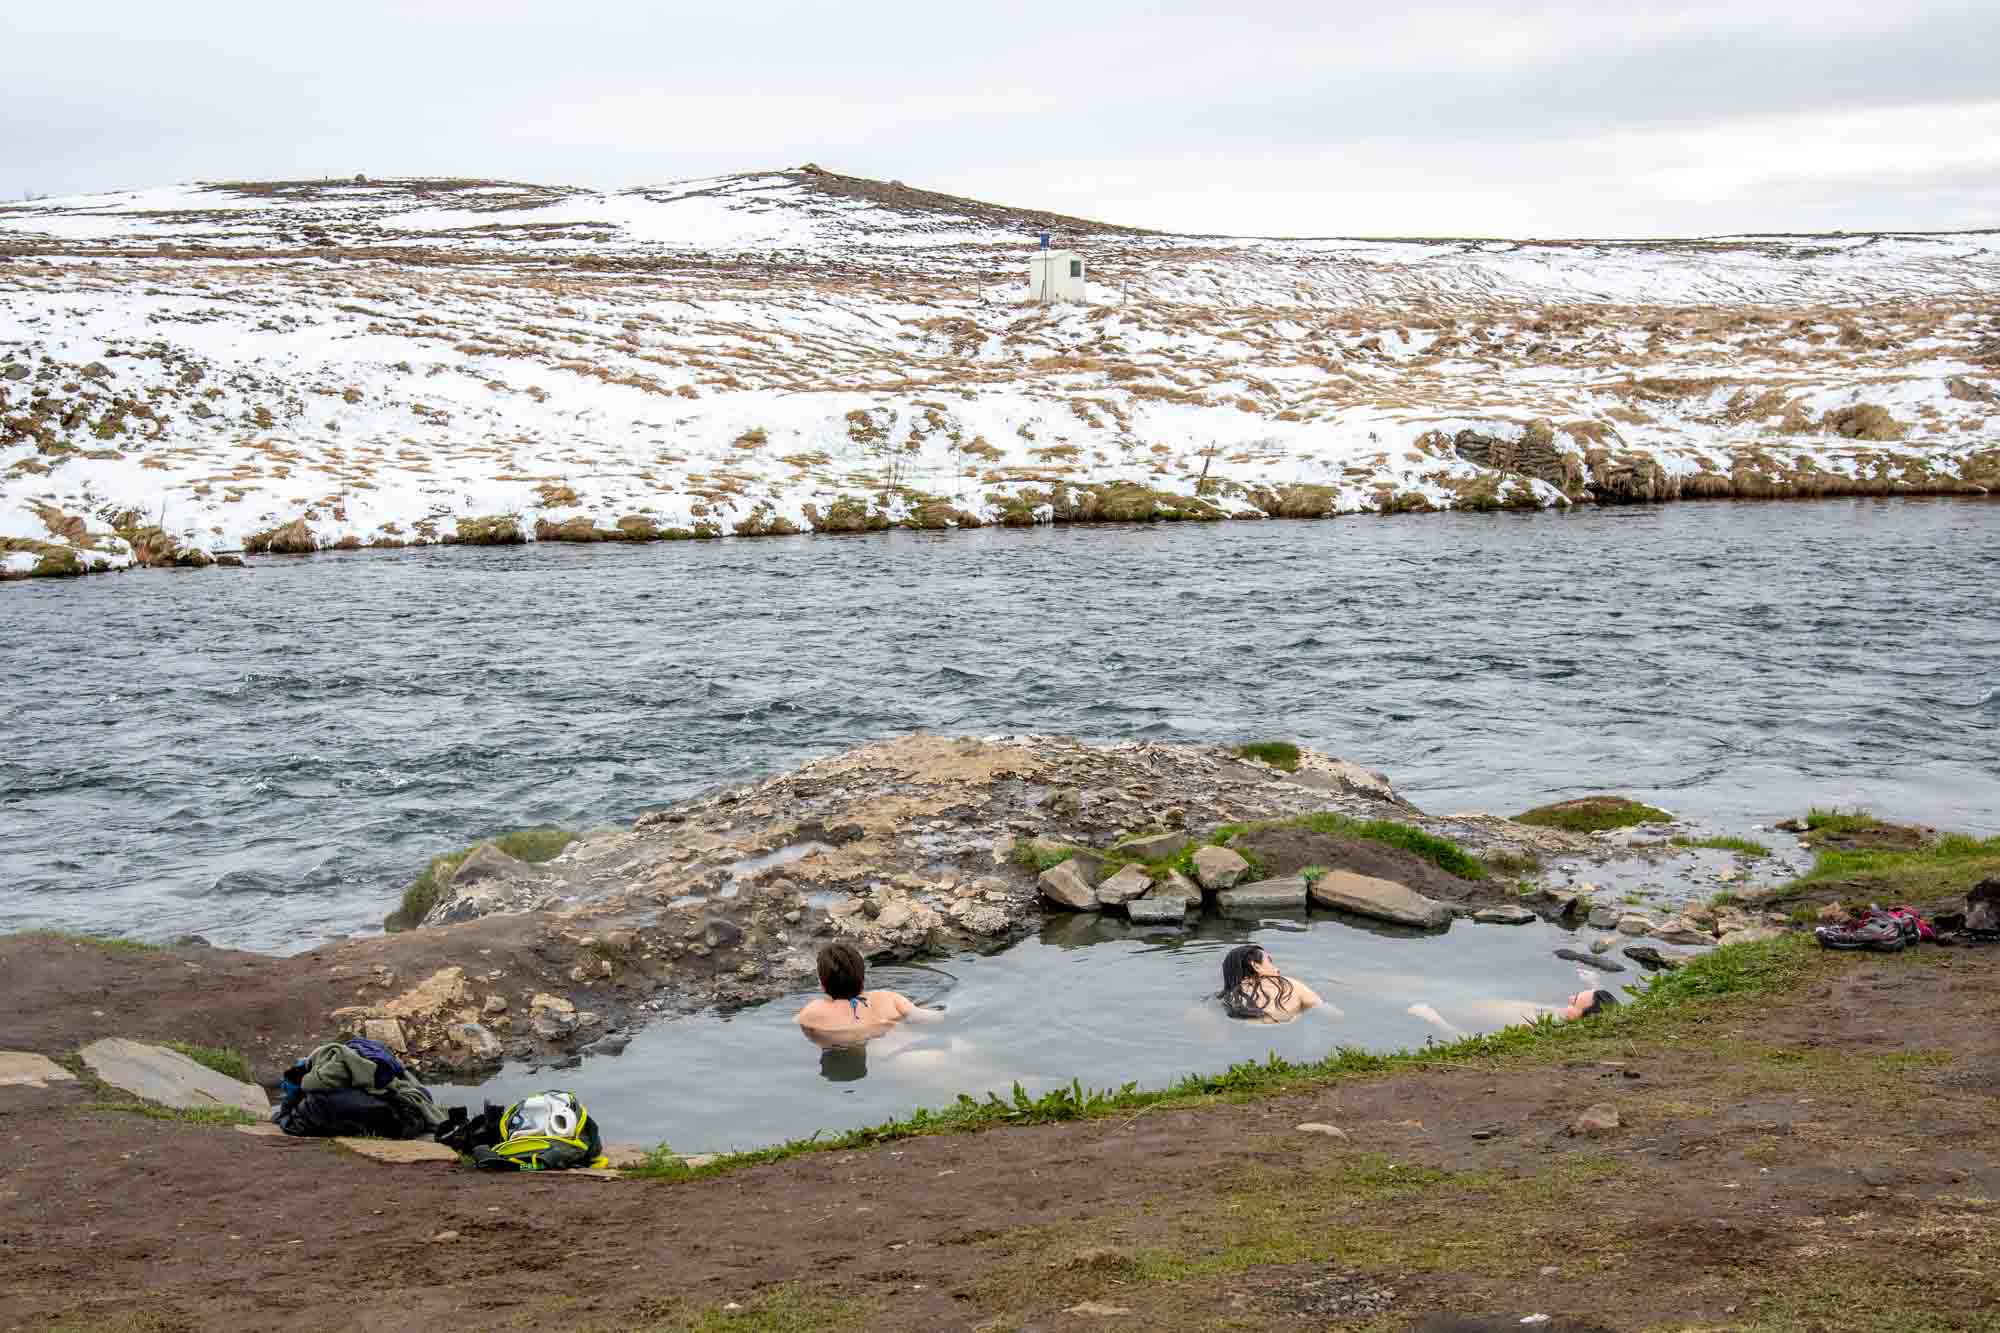 People in a hot springs by a river with snowy hills in the background